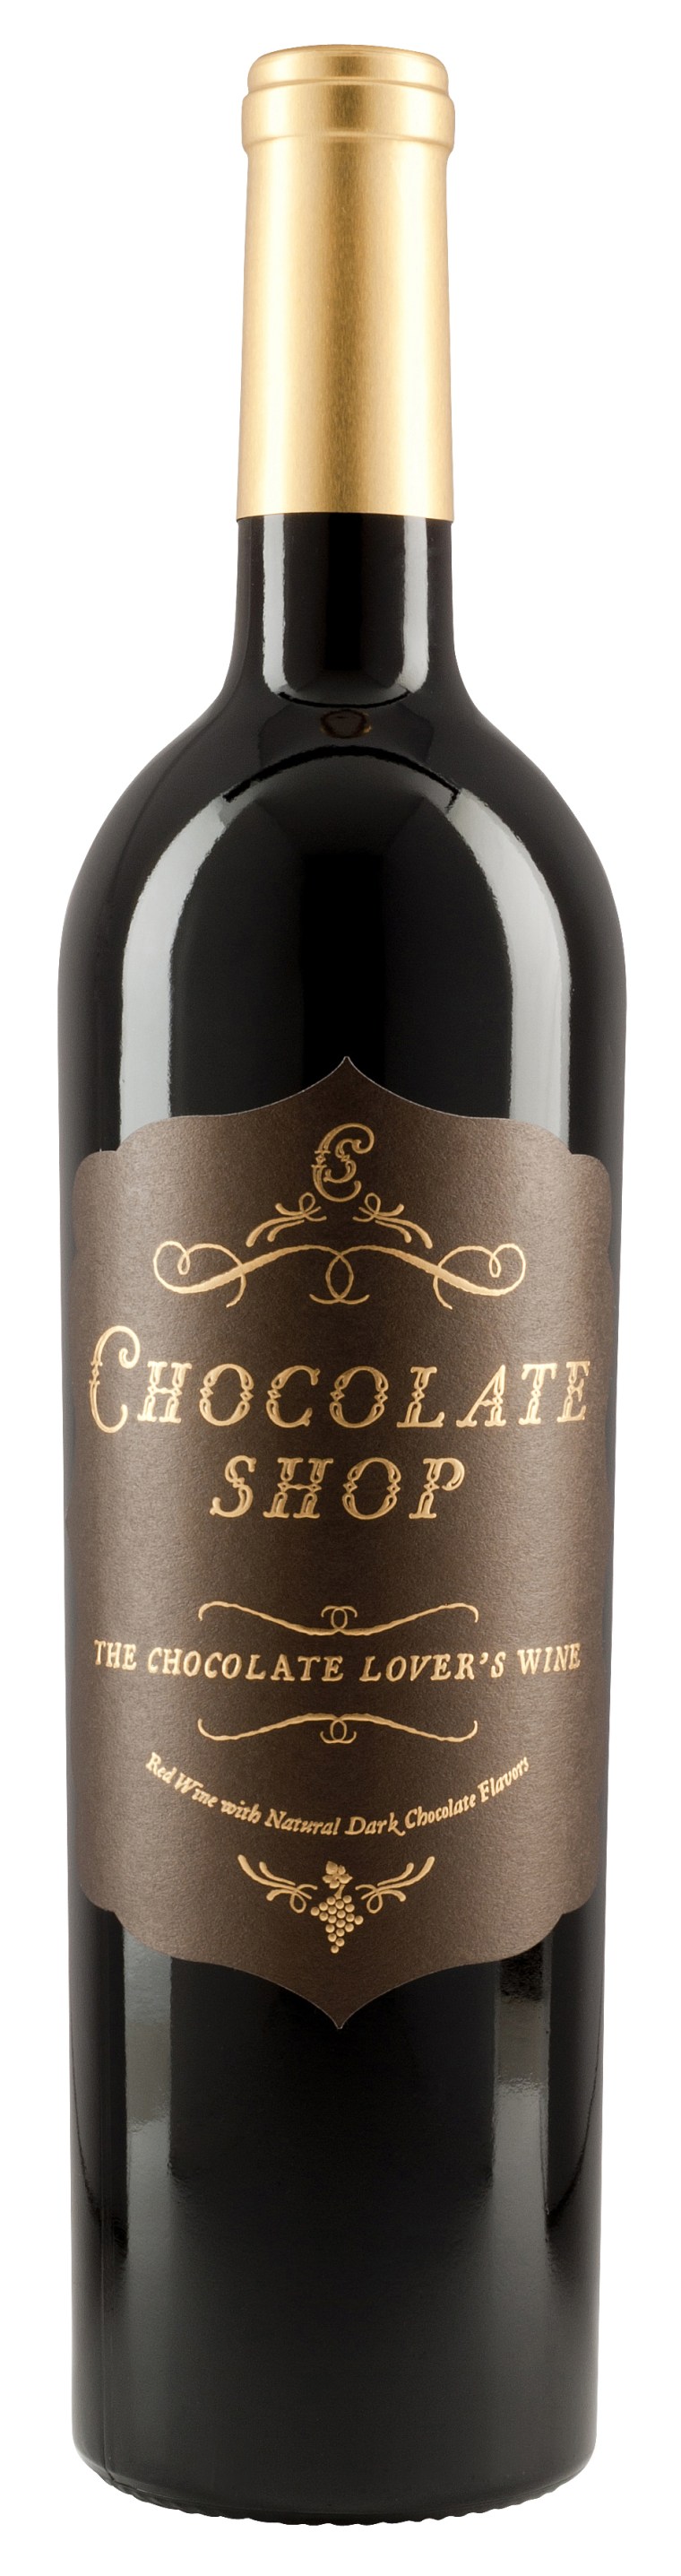 Valentine's Day gift guide: Chocolate Lover's wine from Amazon